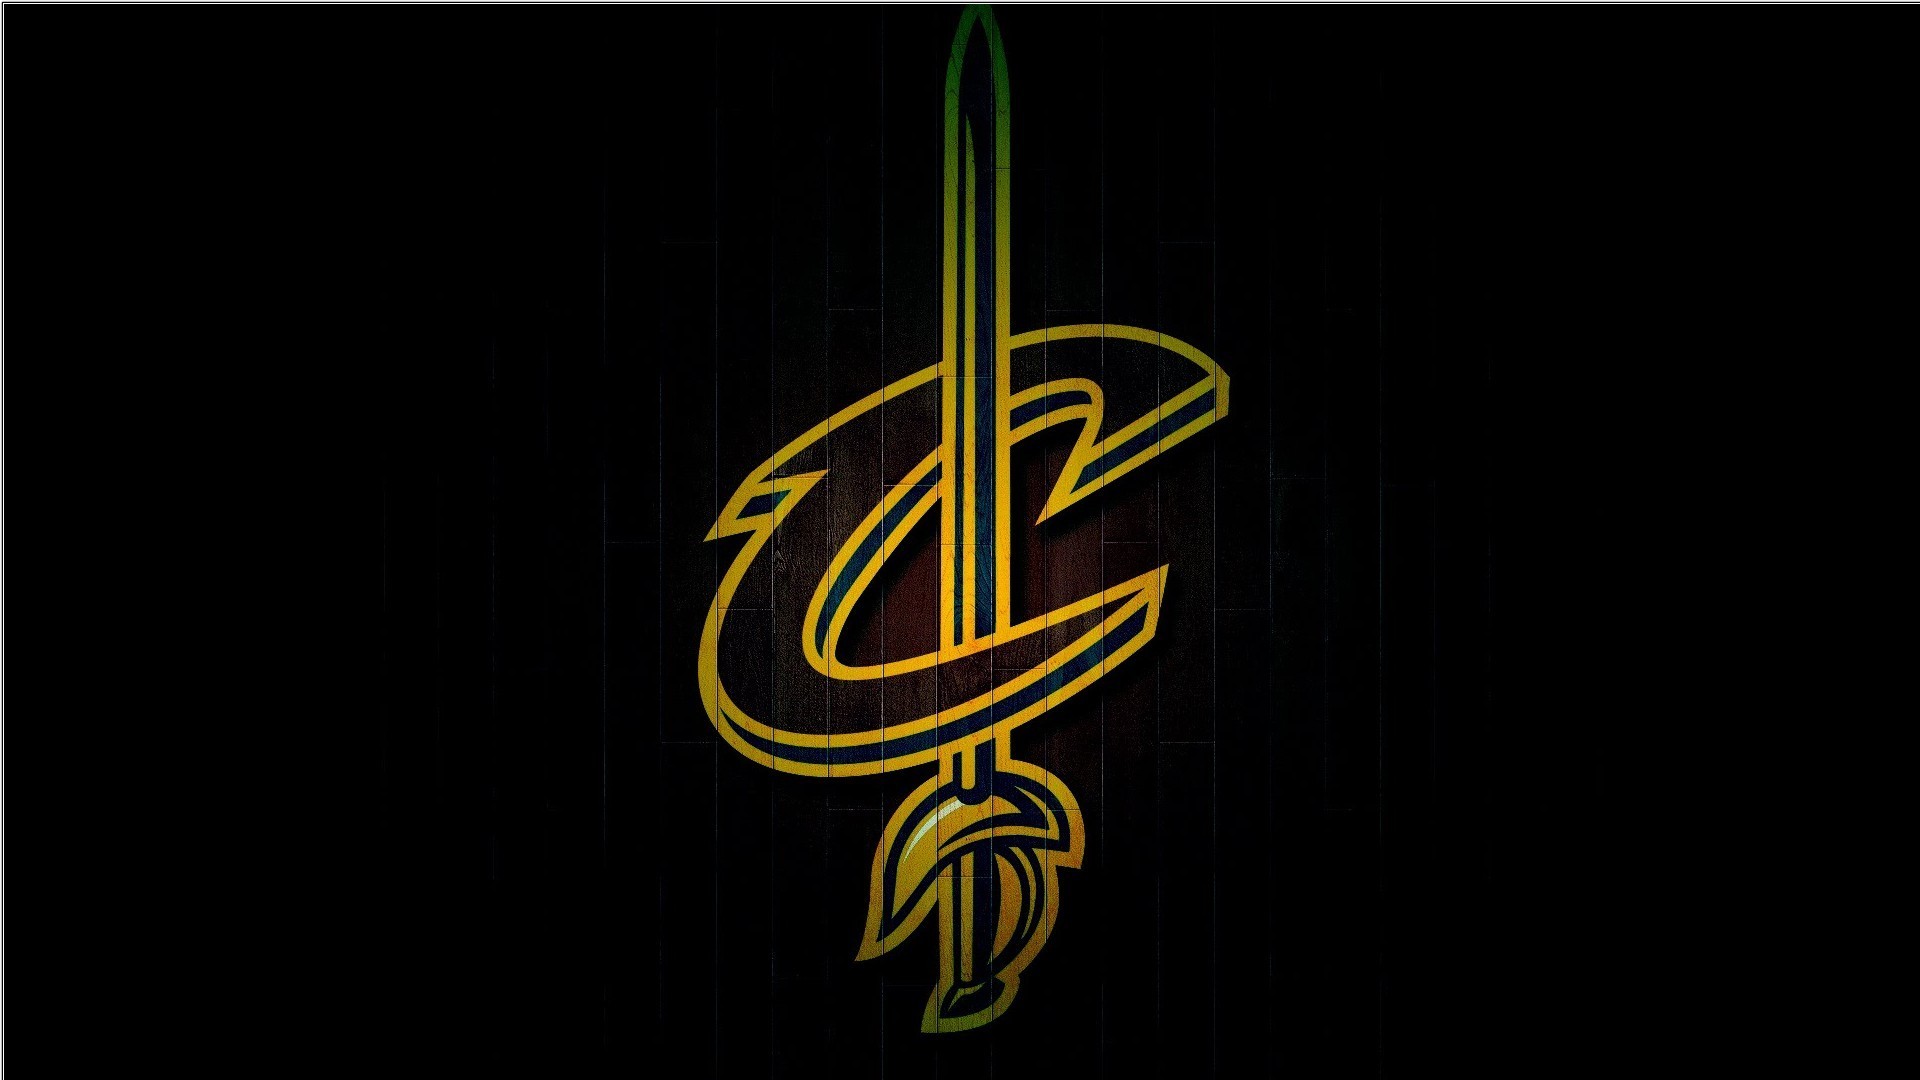 HD Backgrounds Cavs 1920x1080